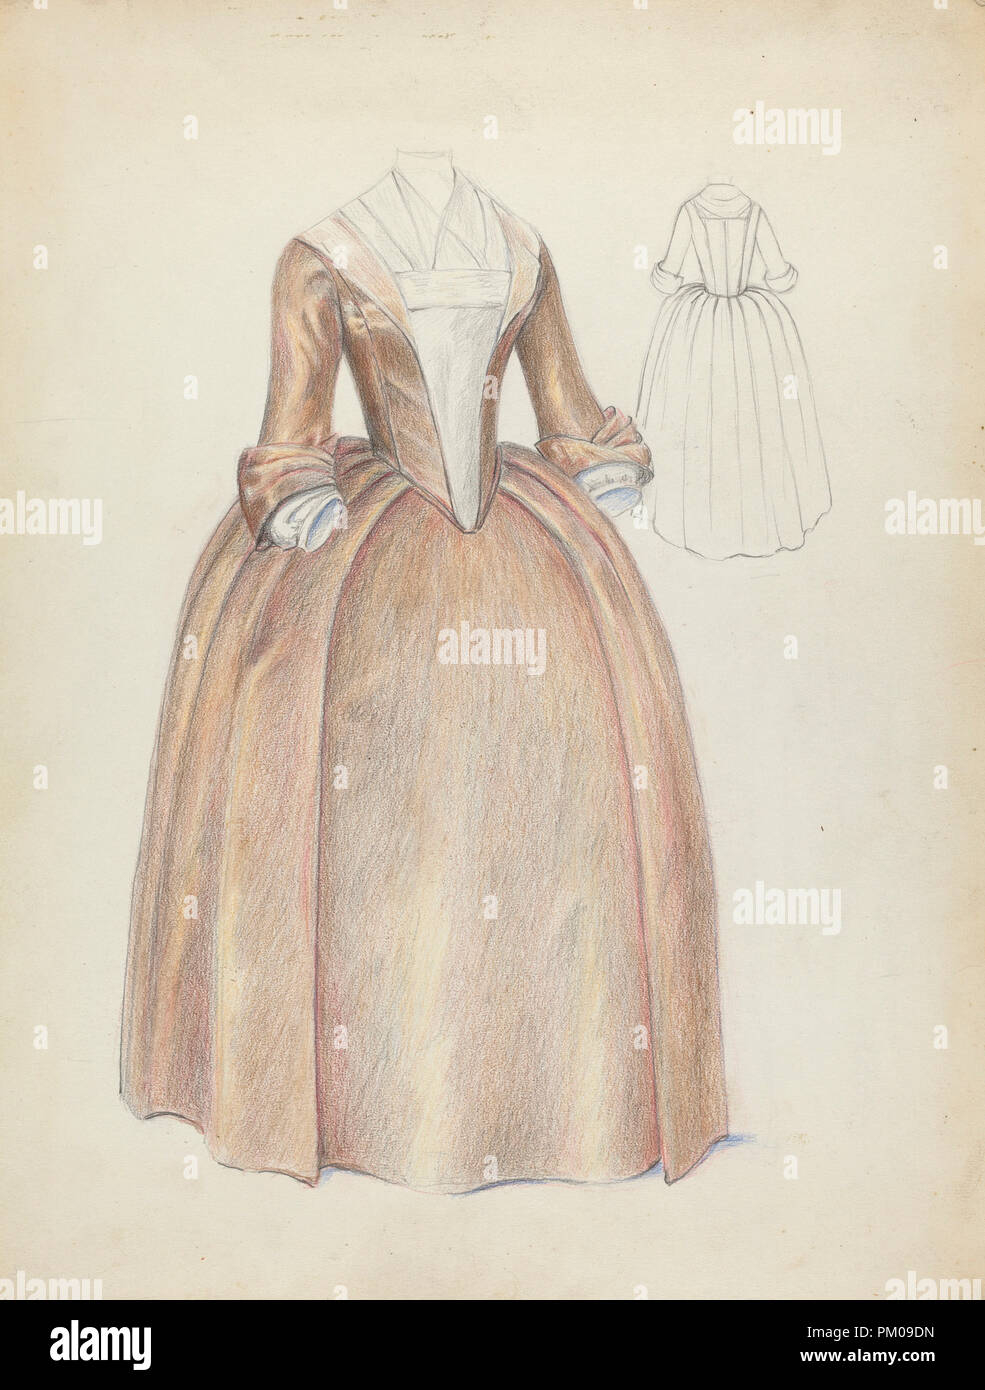 Woman's Dress. Dated: c. 1940. Dimensions: overall: 30.8 x 23.3 cm (12 1/8 x 9 3/16 in.). Medium: colored pencil and graphite on paper. Museum: National Gallery of Art, Washington DC. Author: Jessie M. Benge. Stock Photo